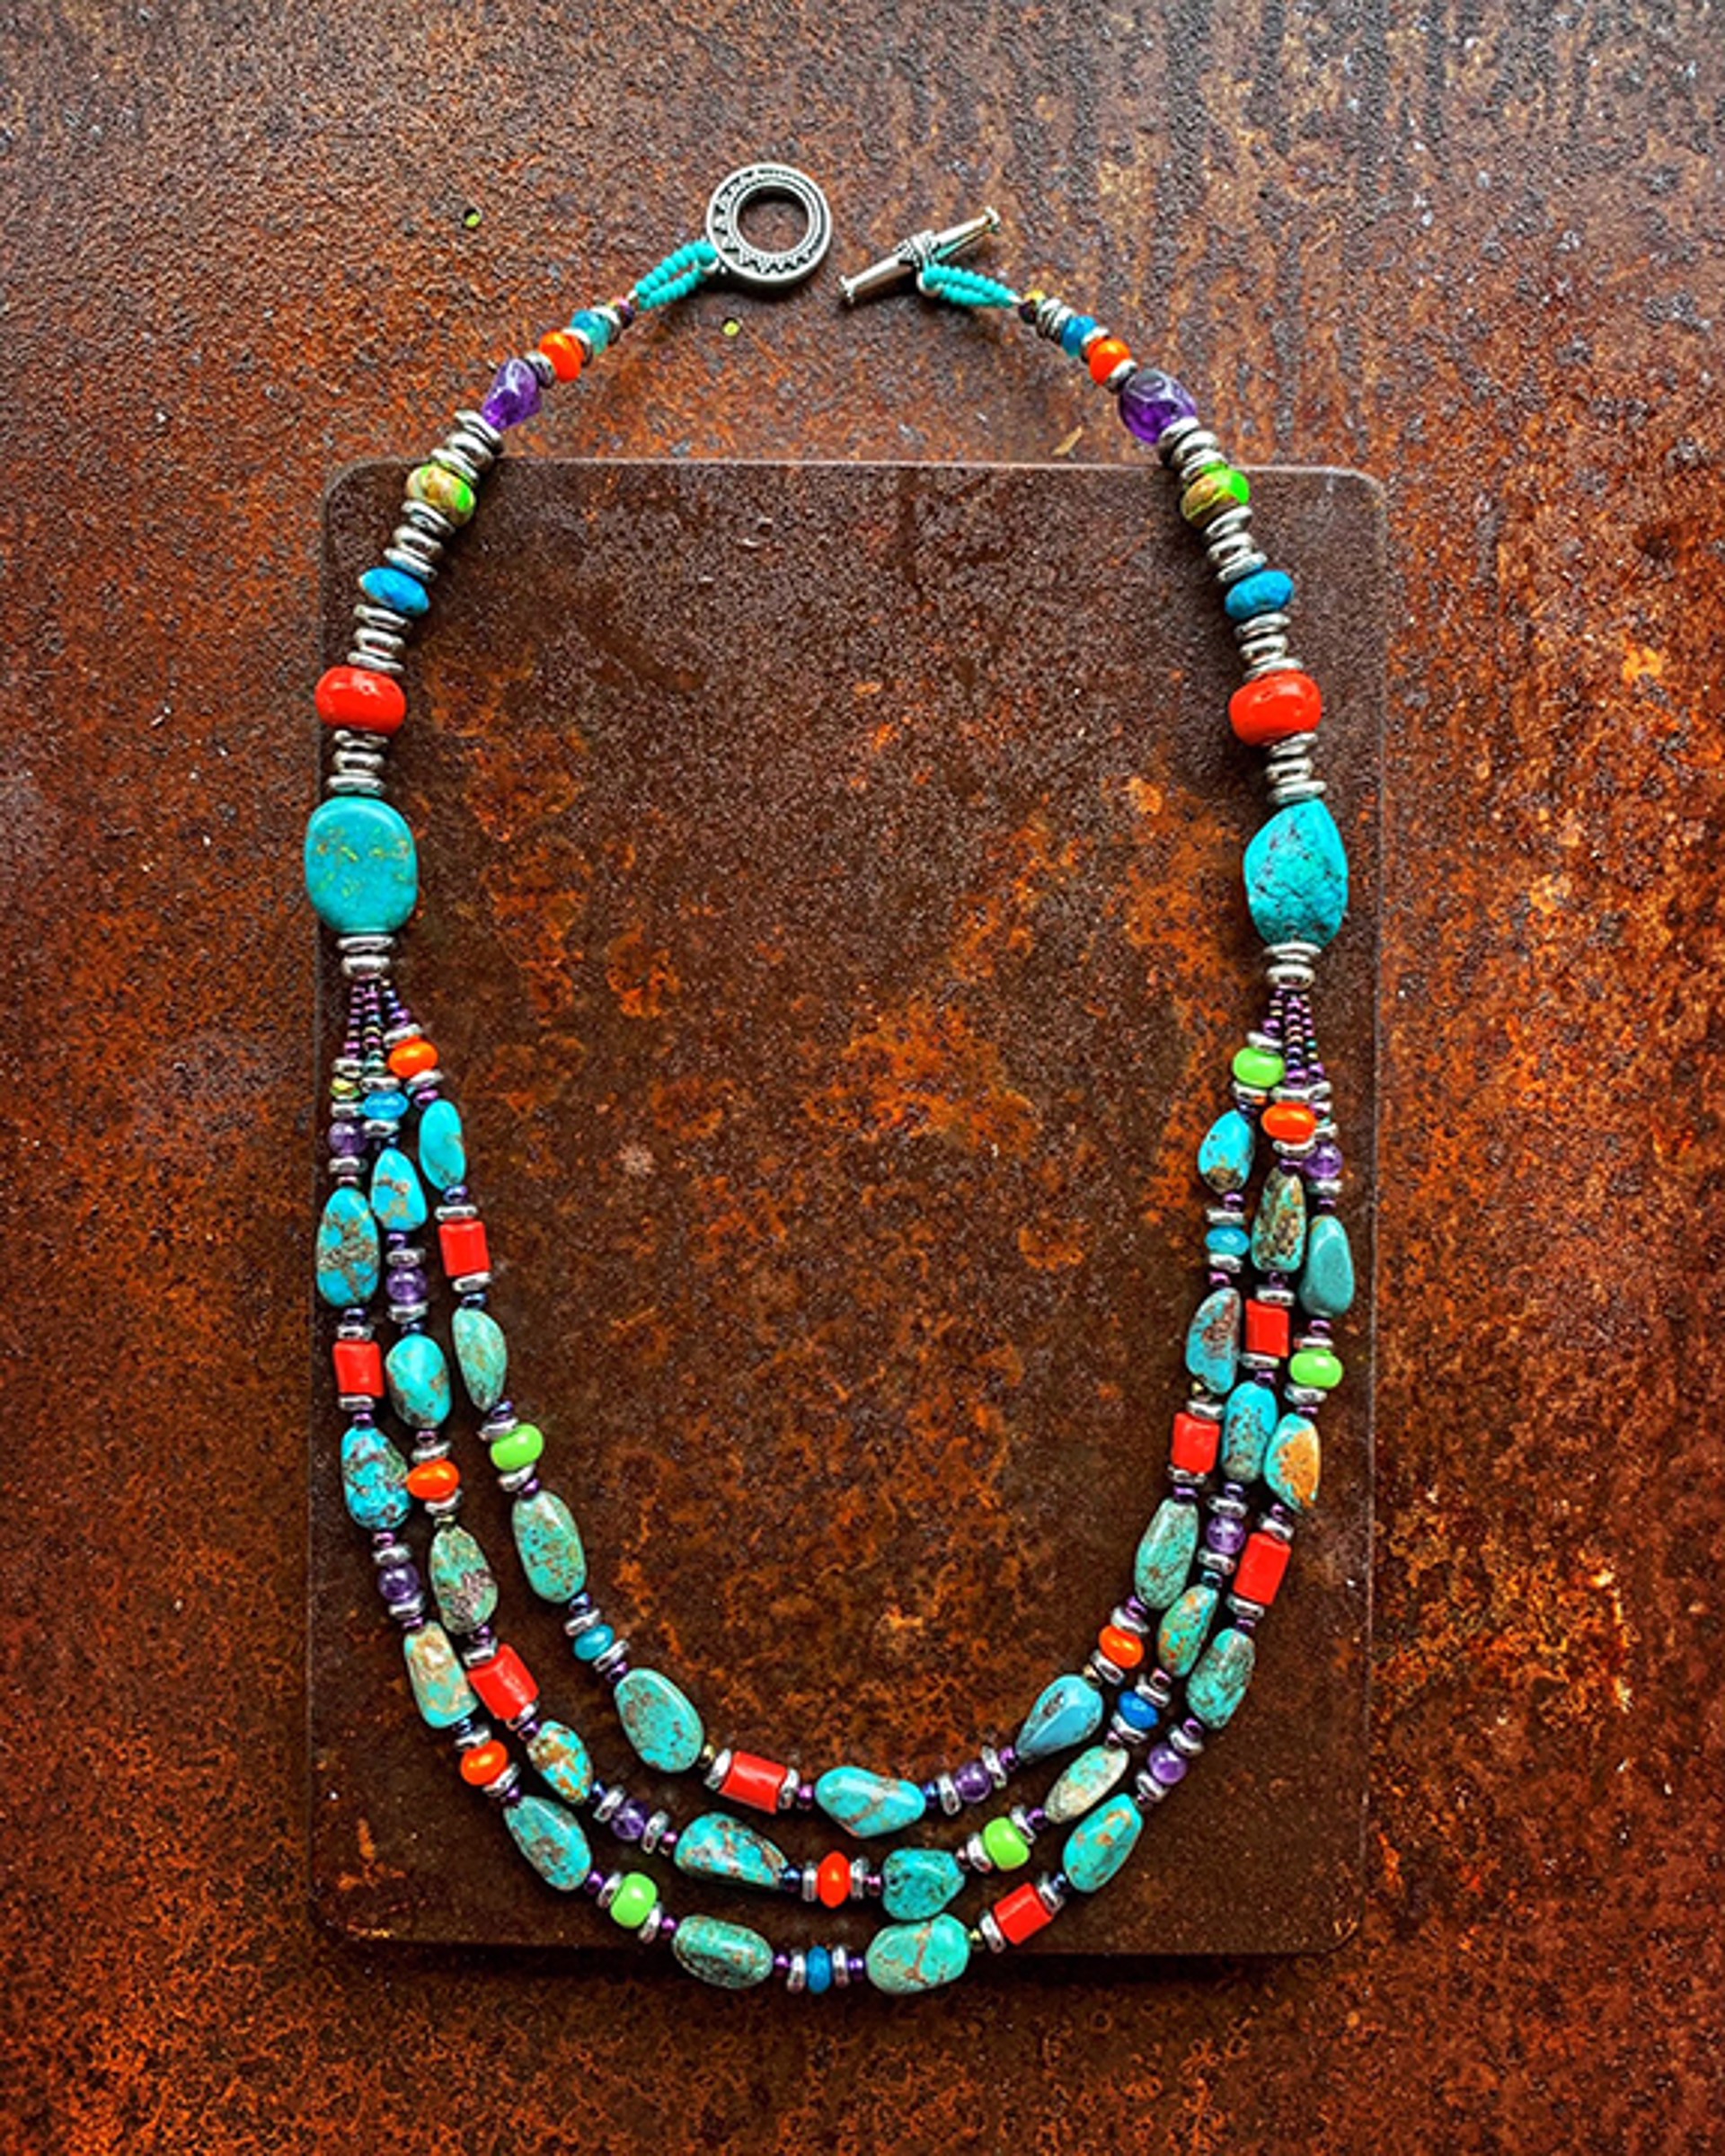 K740 Triple Strand Turquoise Necklace by Kelly Ormsby